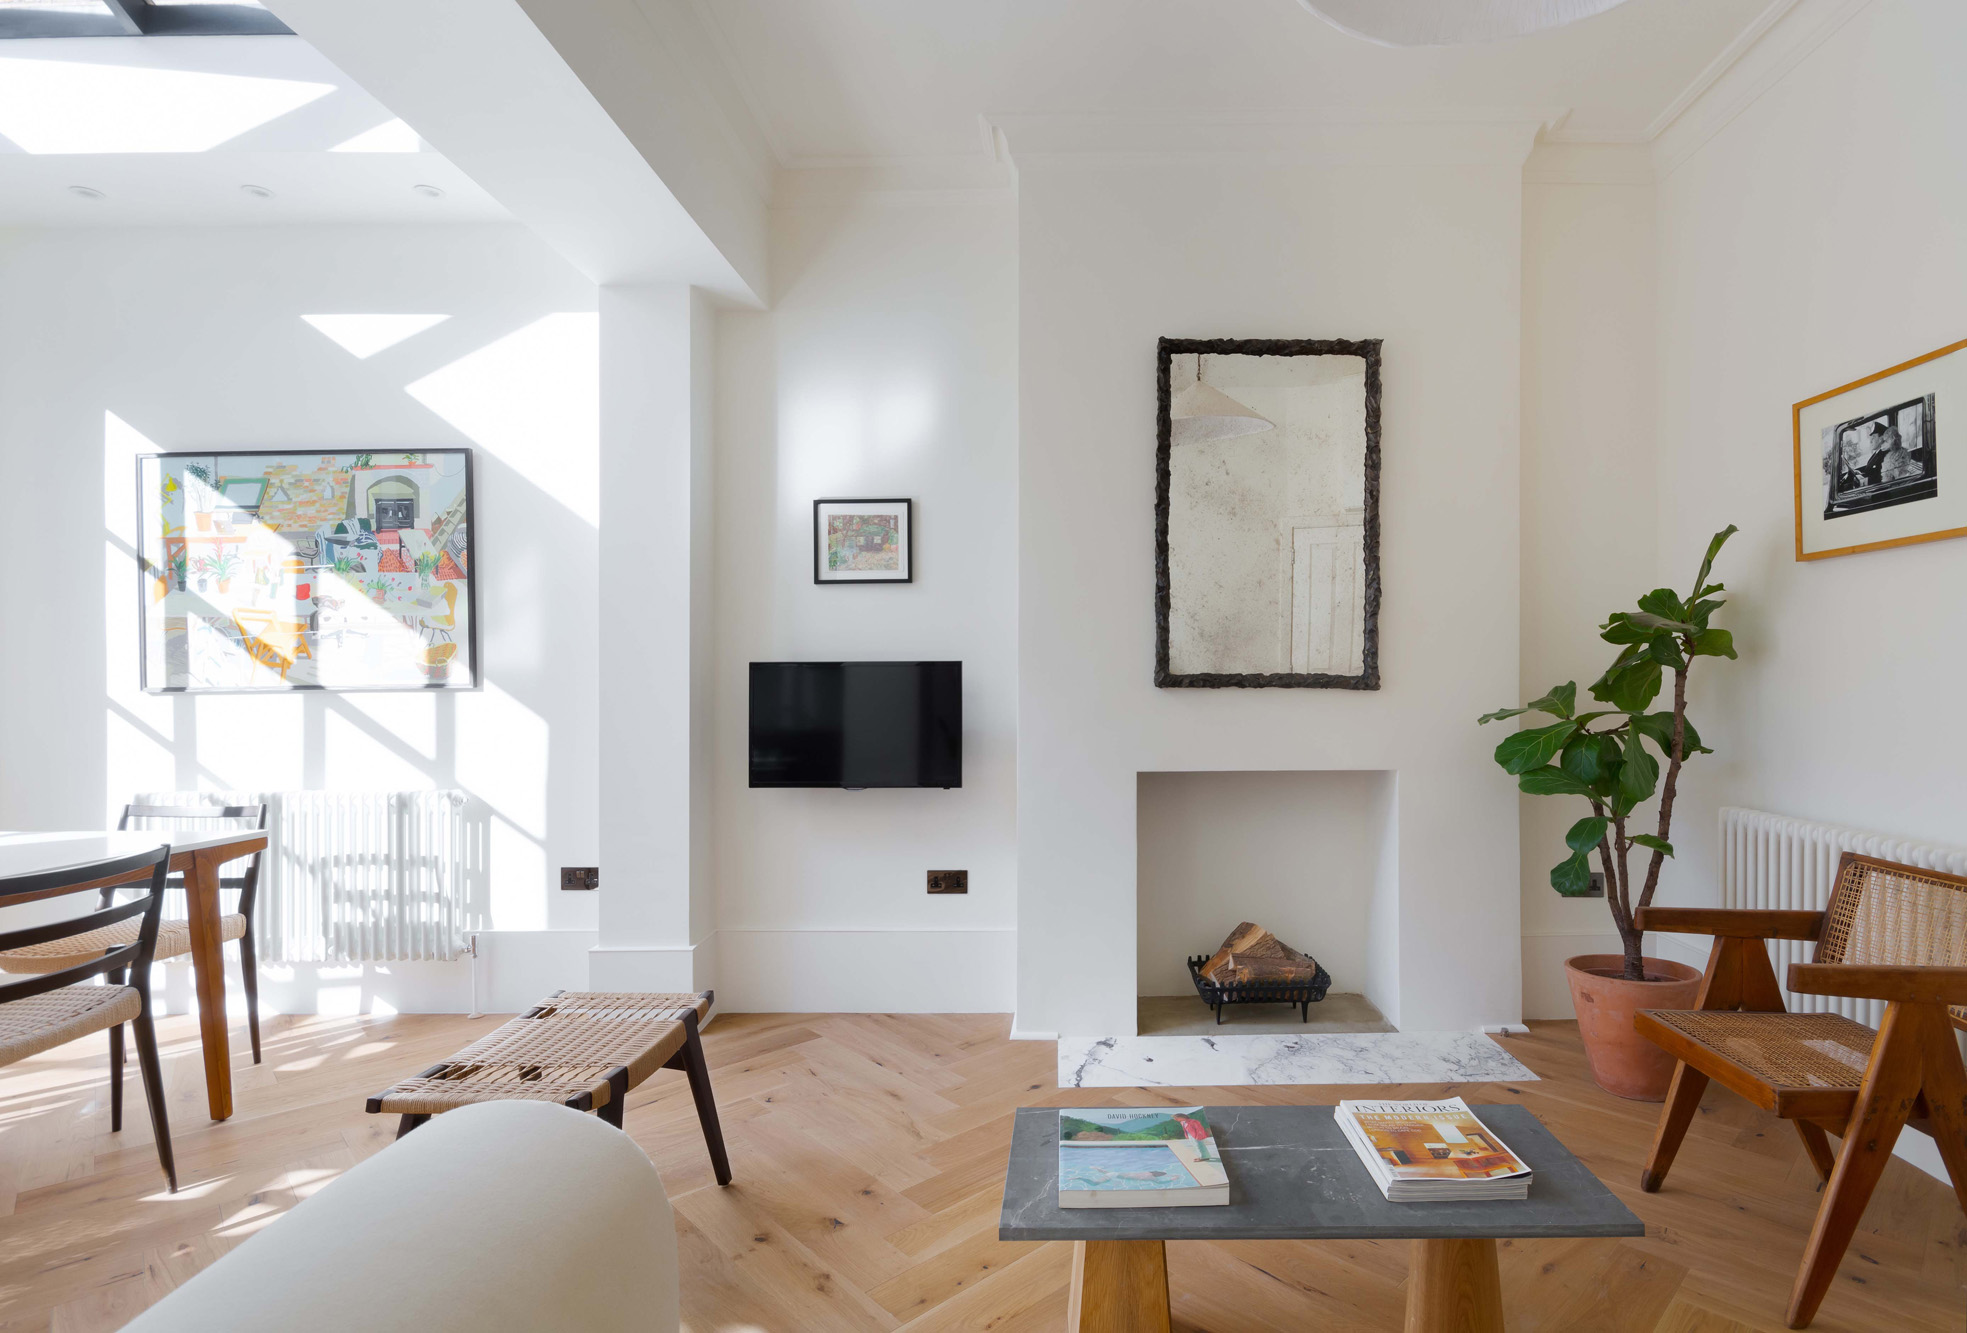 For Sale Artesian Road Notting Hill W2 contemporary reception with skylight and blonde wood floors